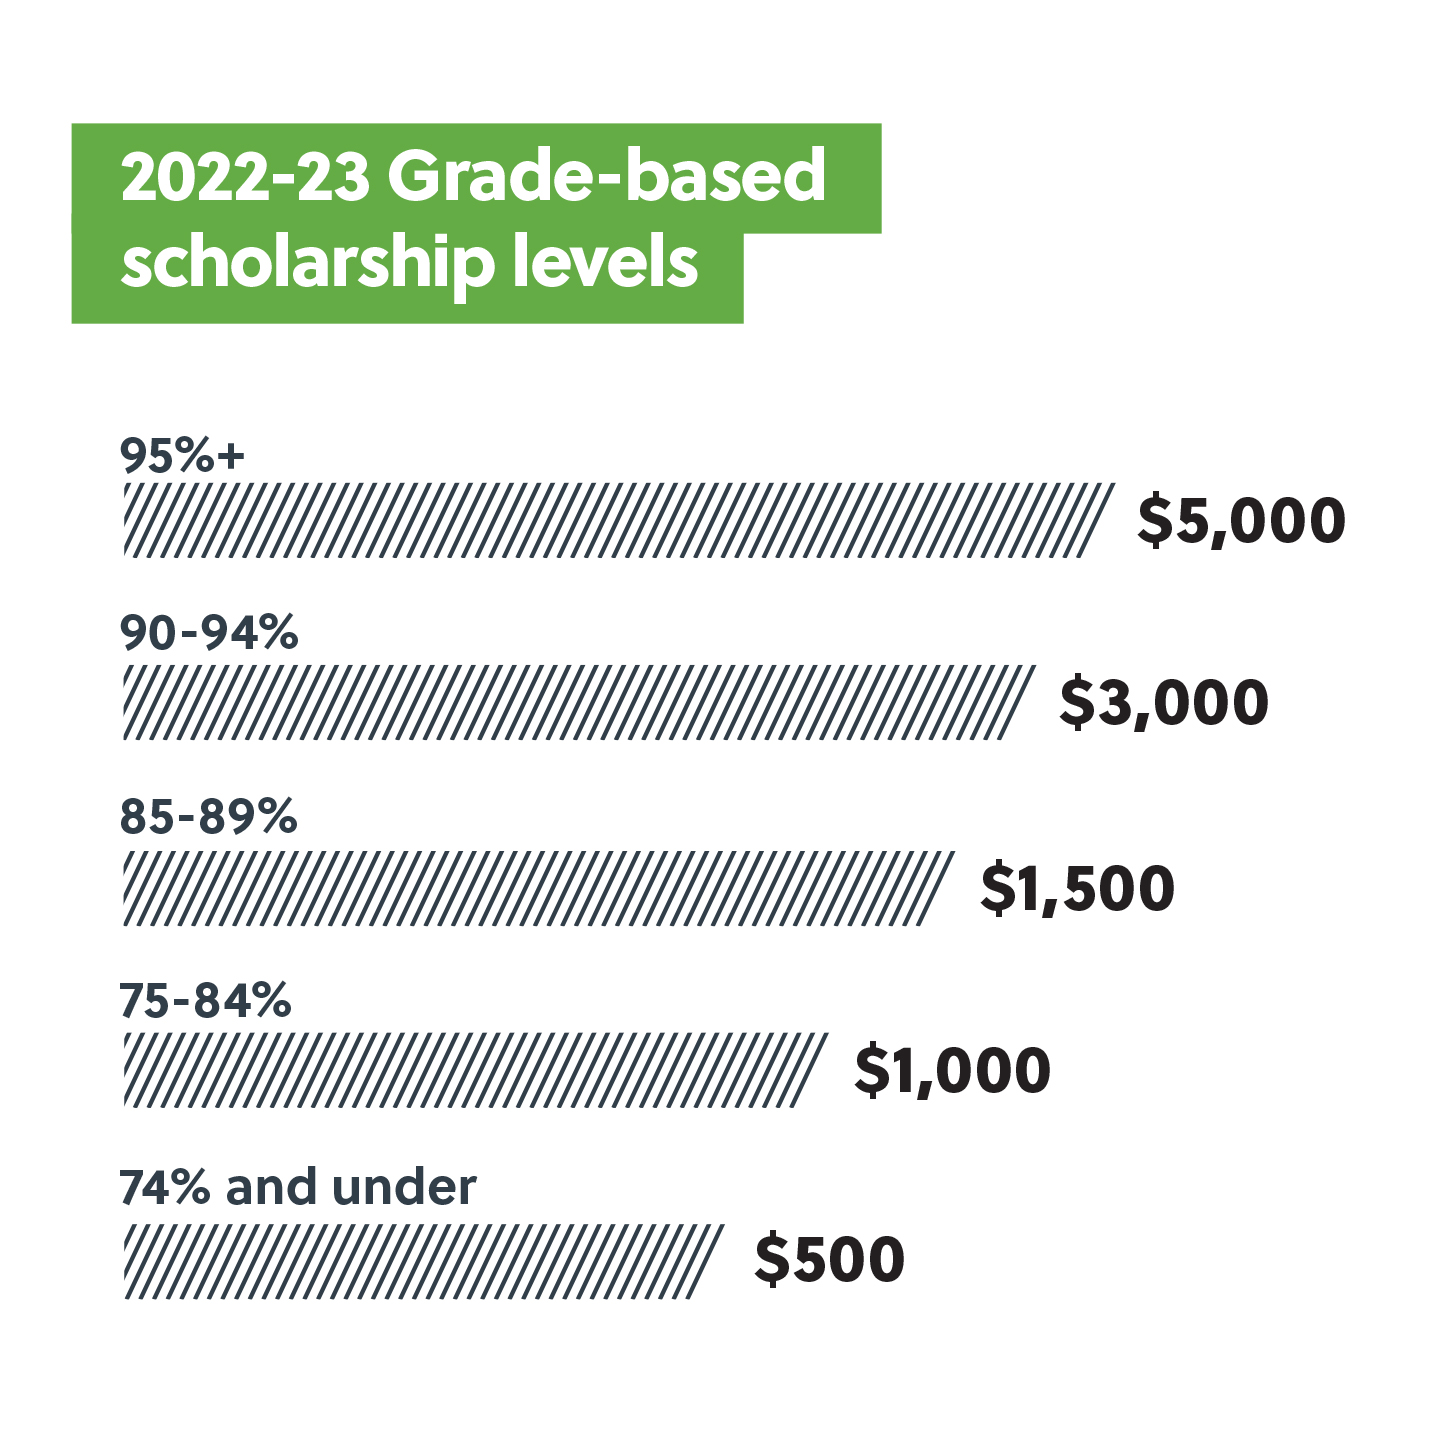 2022-23 Entrance Scholarship levels. 74 per cent and under equals $500, 75-84% equals $1,000, 85-89% equals $1,500, 90-94% equals $3,000 and 95% equals $5,000